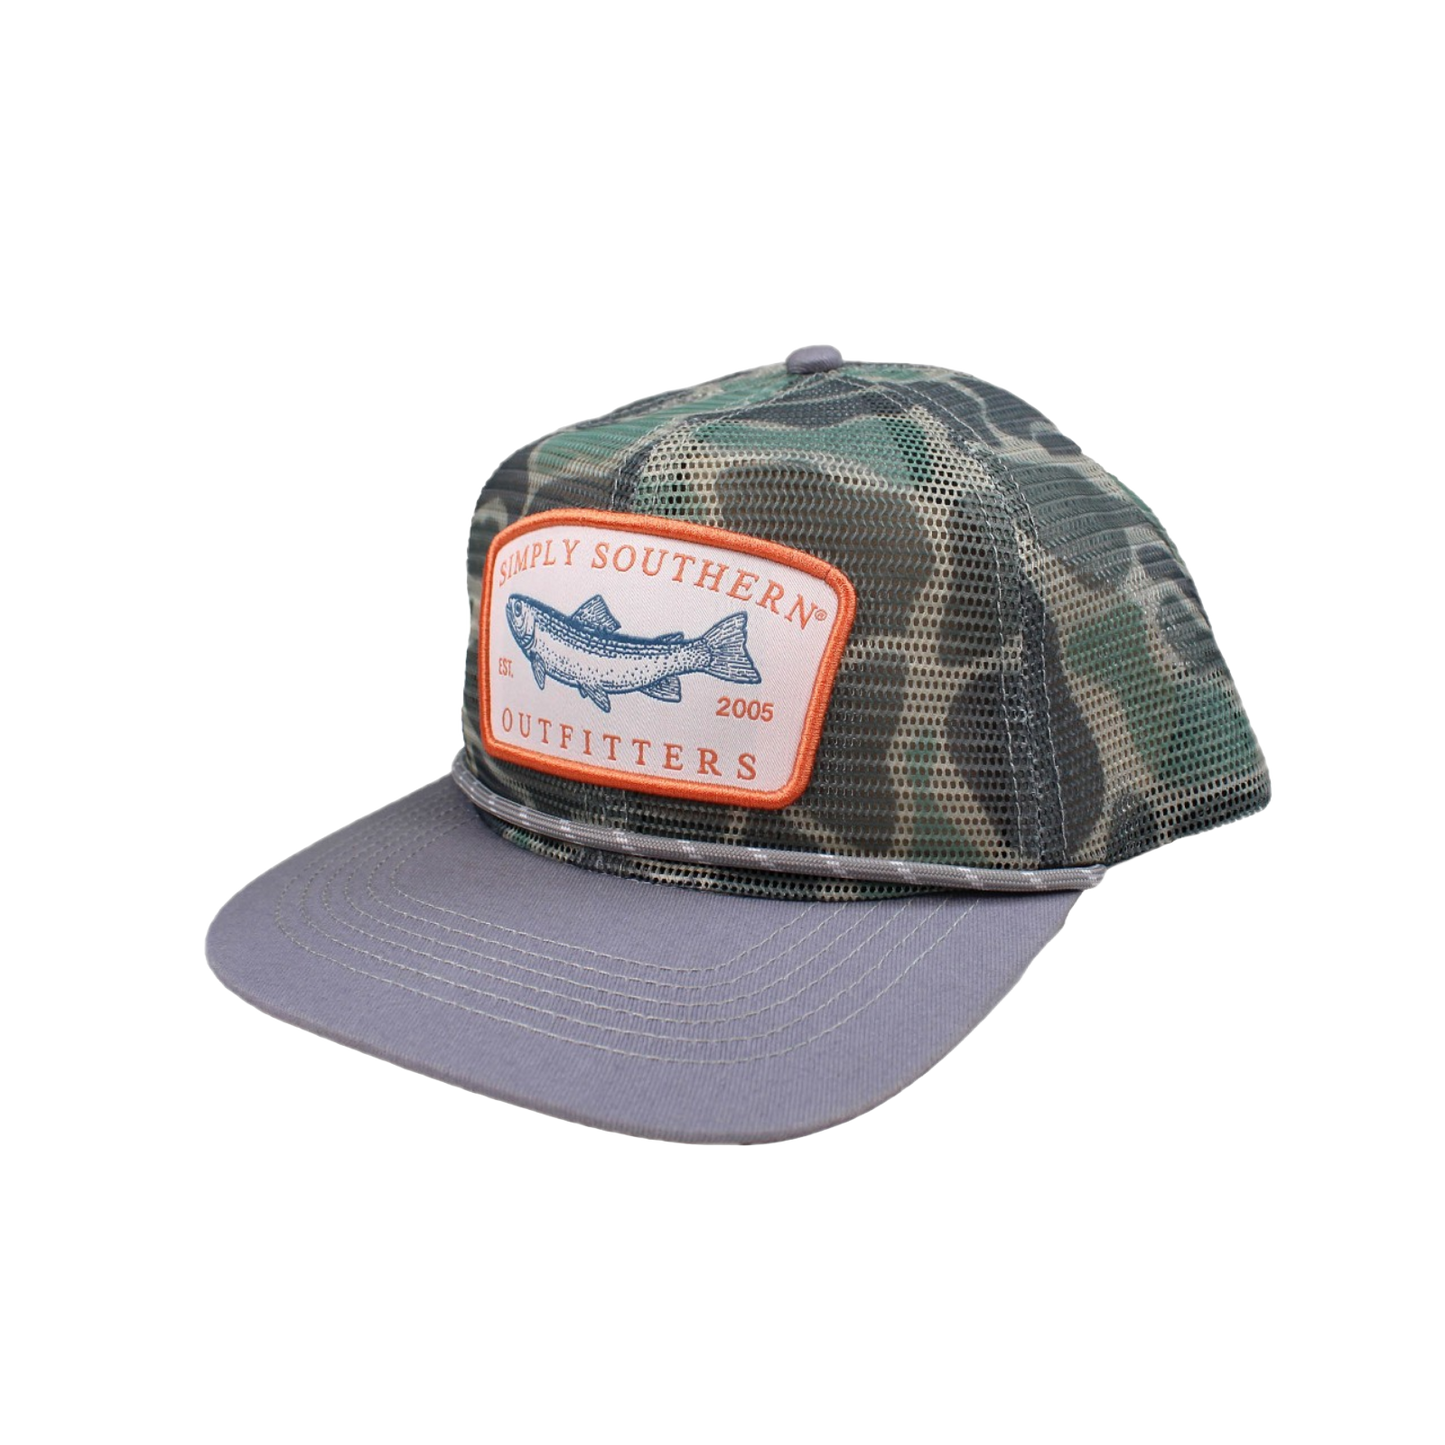 Simply Southern Men's Fish Camo Snapback Hat 0124-MN-HAT-CURVED